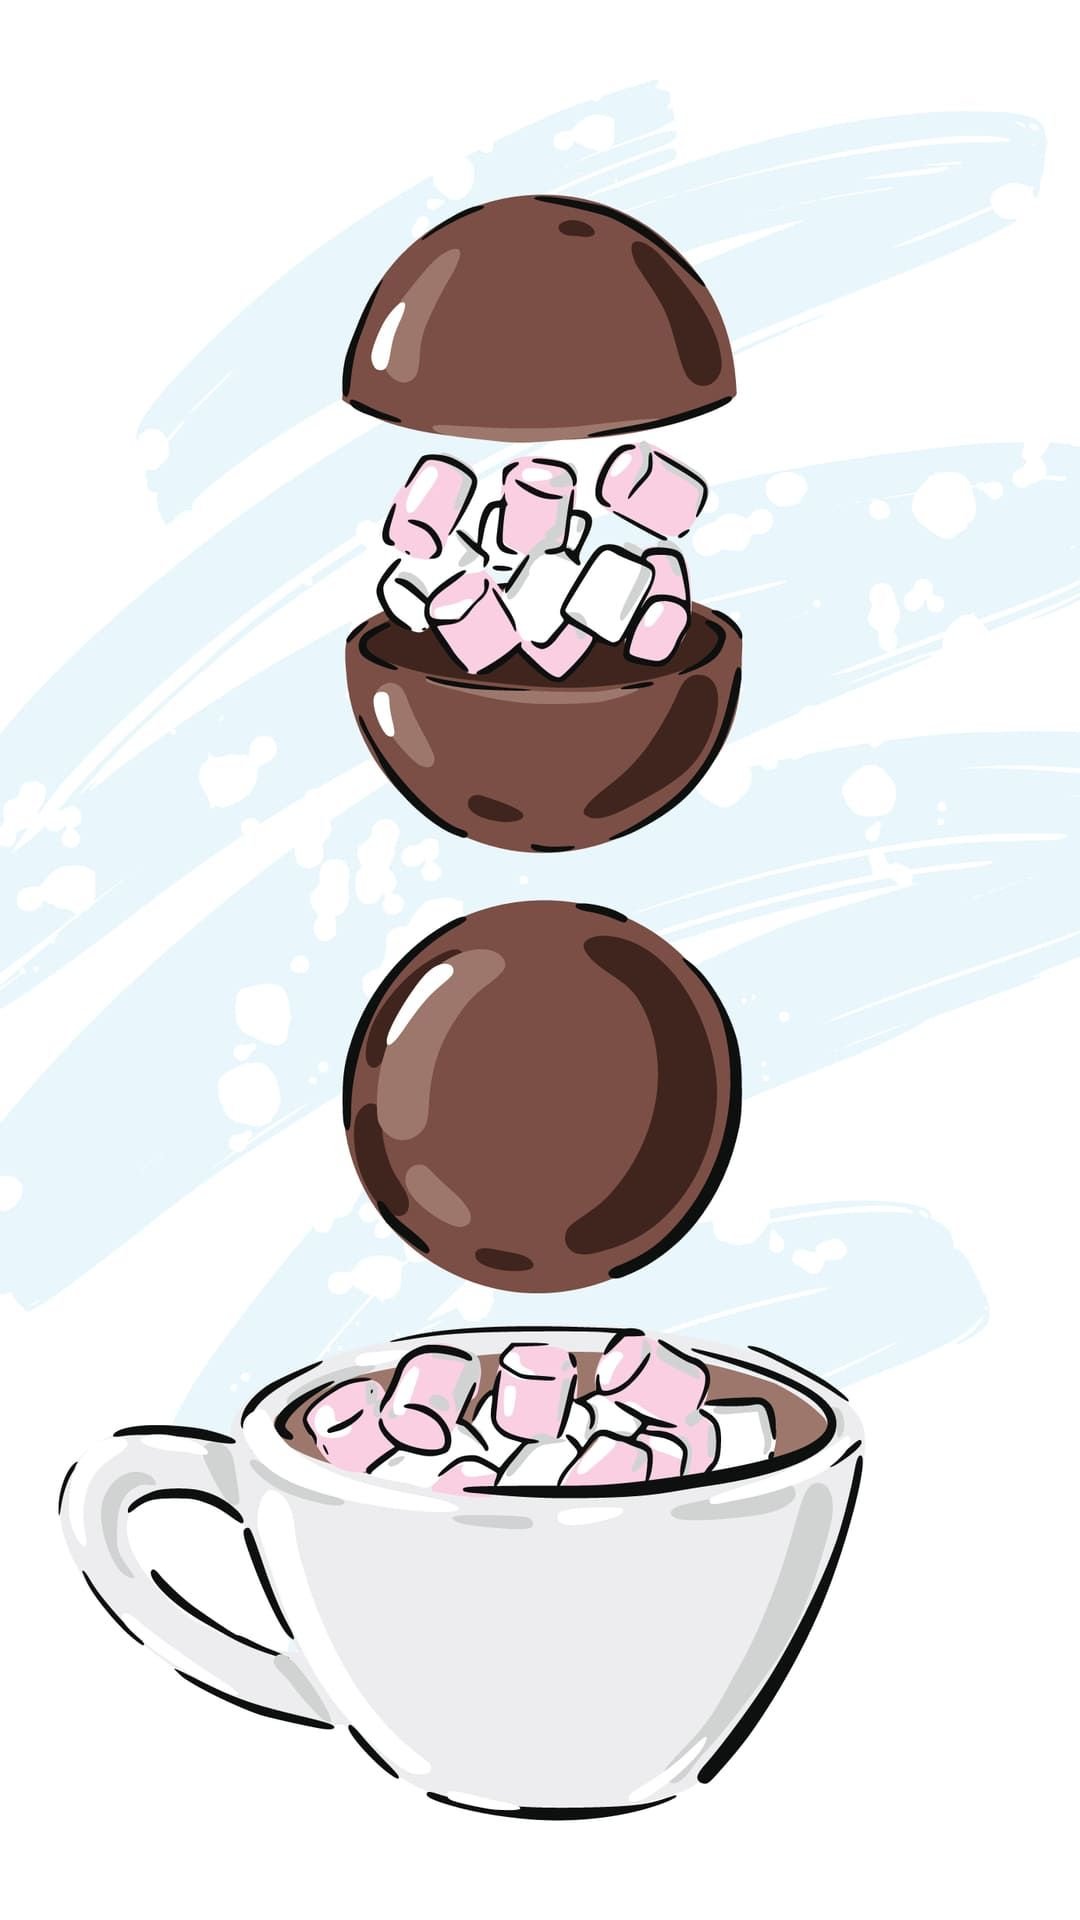 Animated hot chocolate bombs with mallows. | Source: Shutterstock